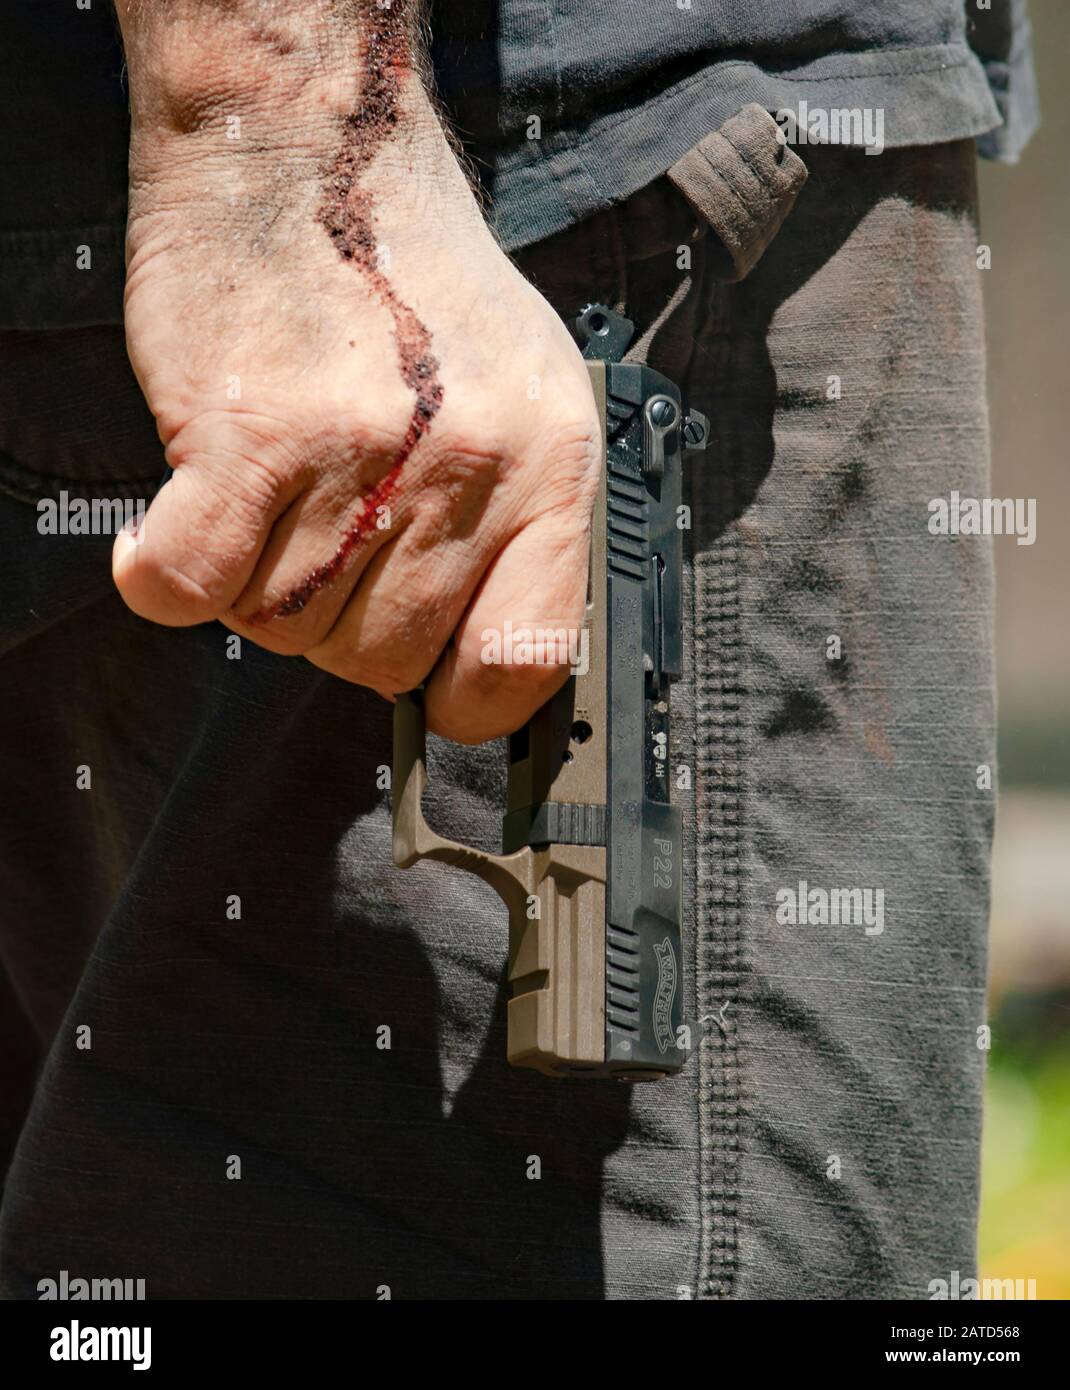 Man with dried blood on his hand and arm wearing tactical pants a holding Walther P22 automatic pistol. Stock Photo